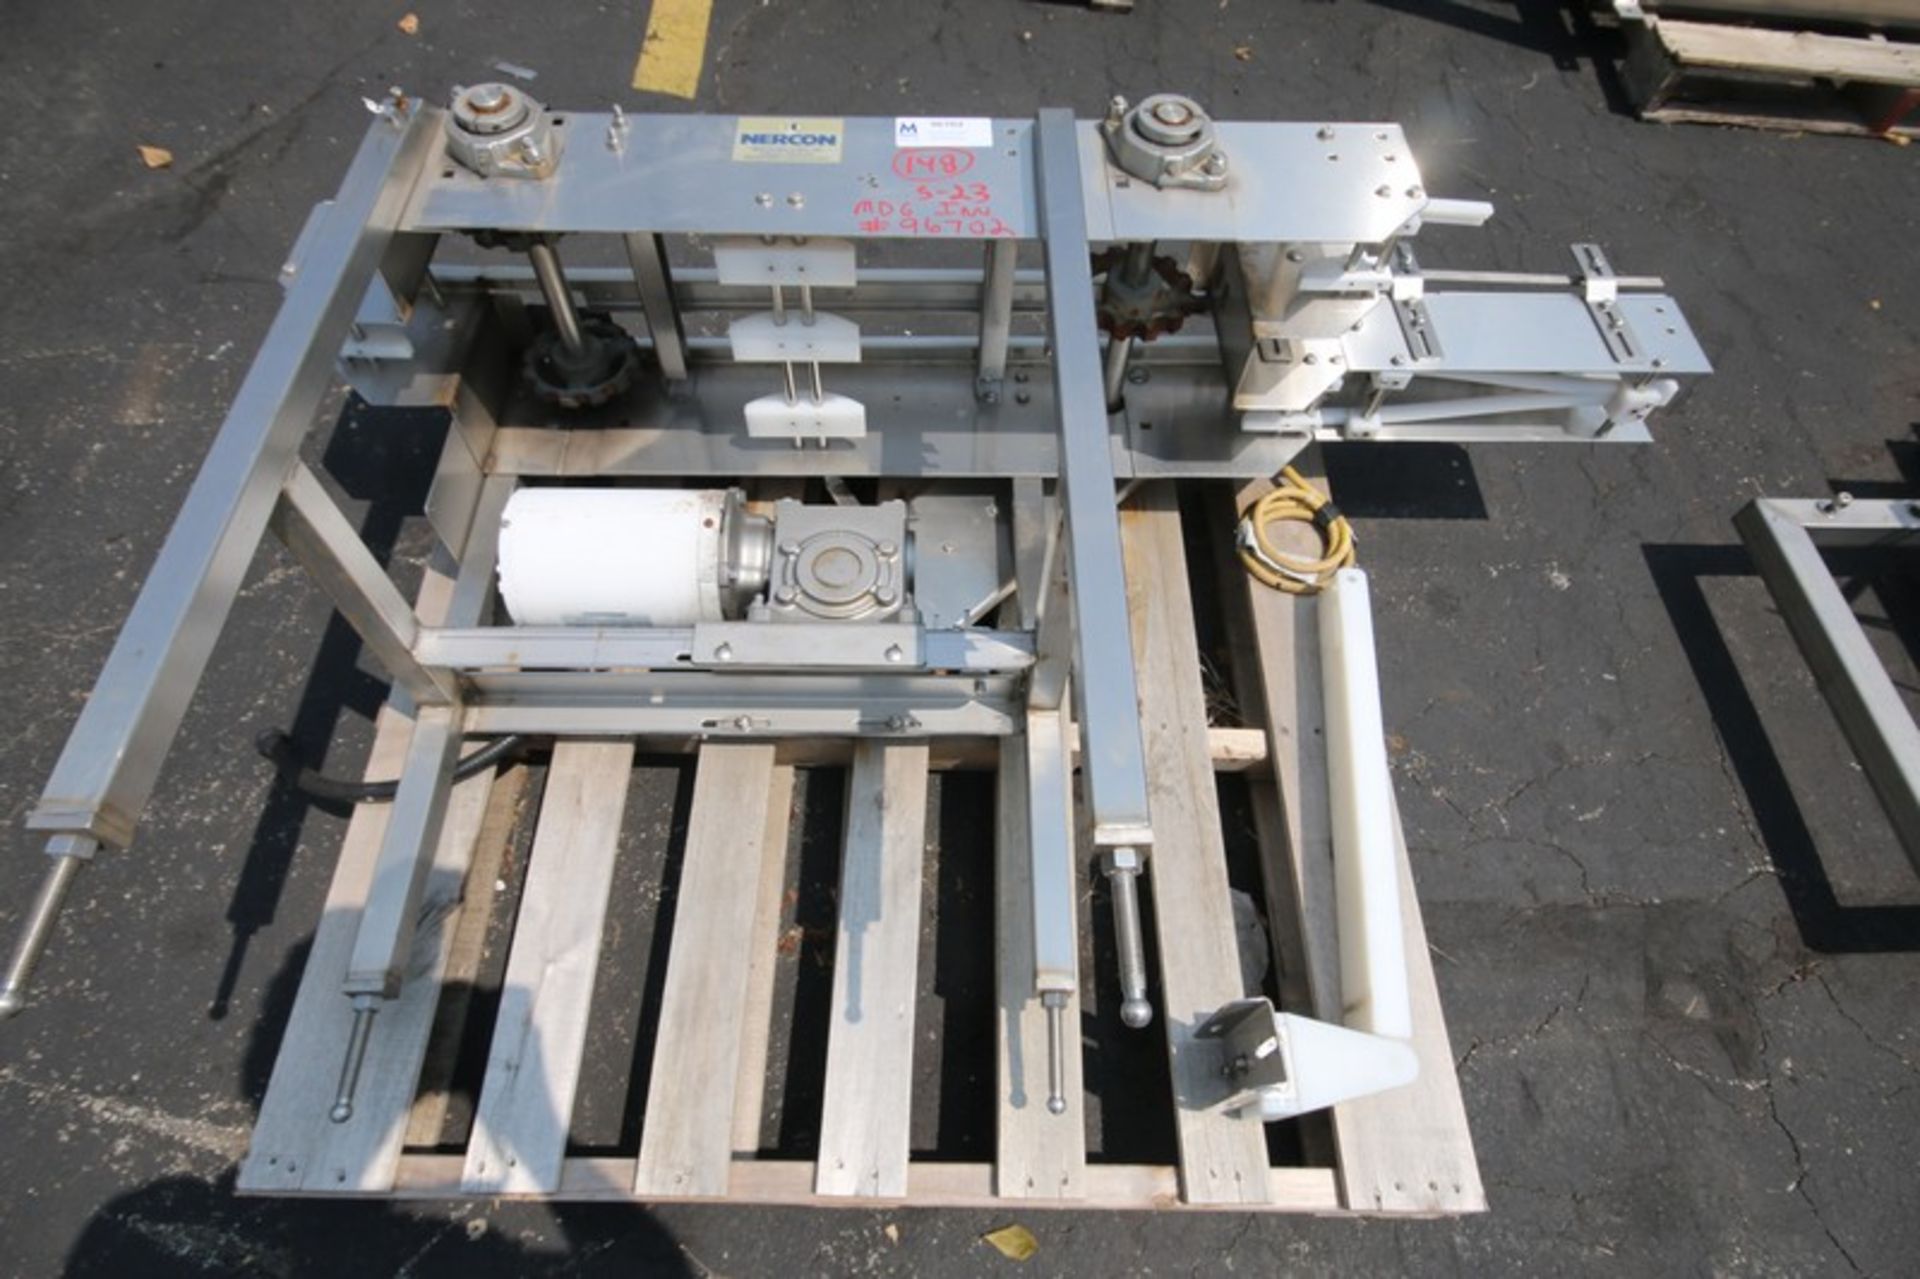 Nercon Aprox. 66" L x 4.5" to 10" W x 36" H S/S Product Conveyor Combiner, with Drive Motor) (INV#